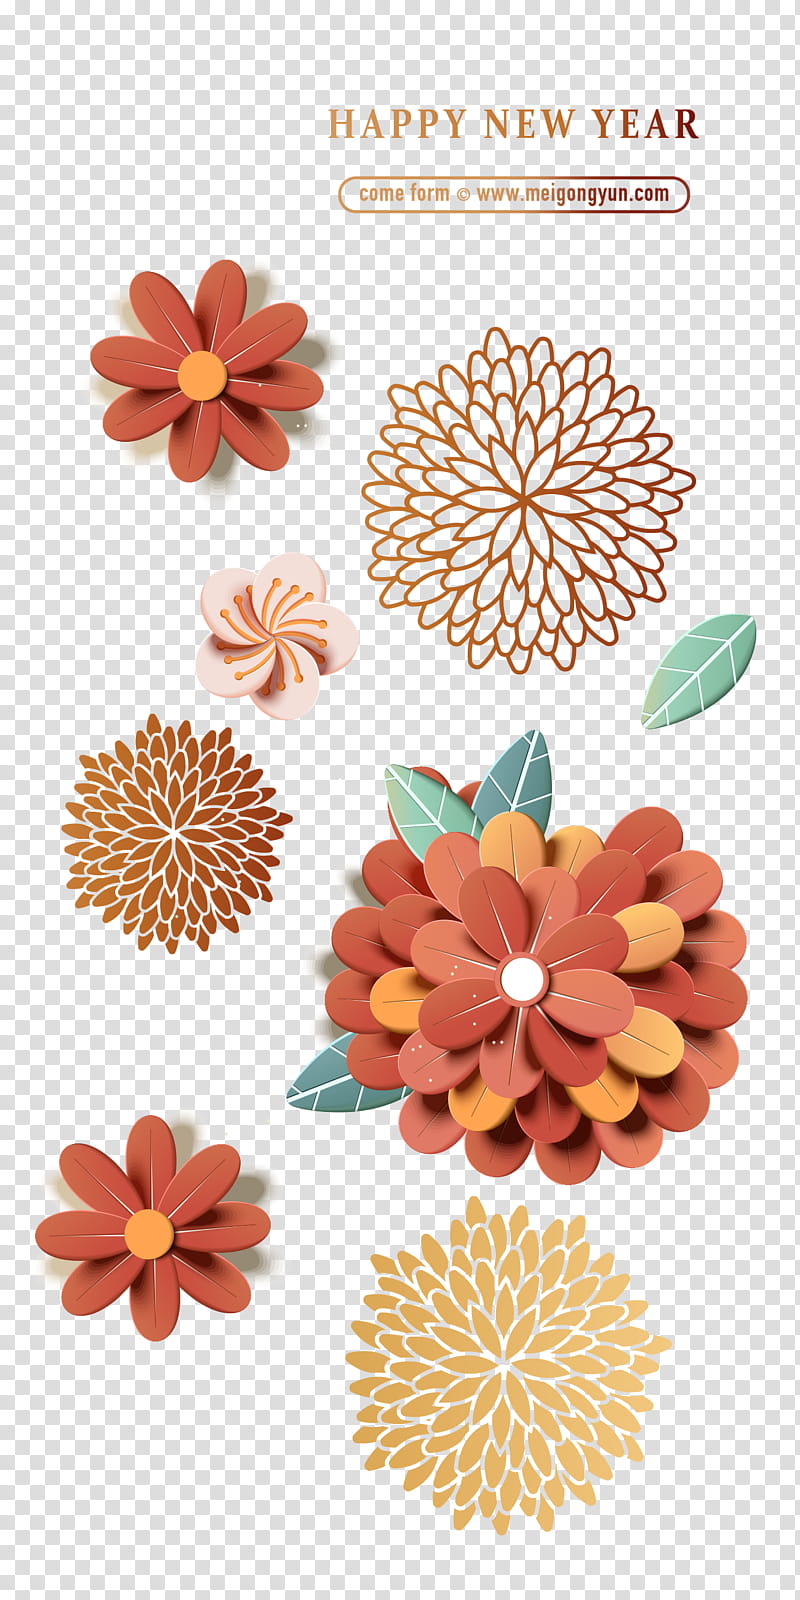 Chinese New Year Flower, Poster, Festival, Creativity, Petal, Orange, Cut Flowers, Floral Design transparent background PNG clipart